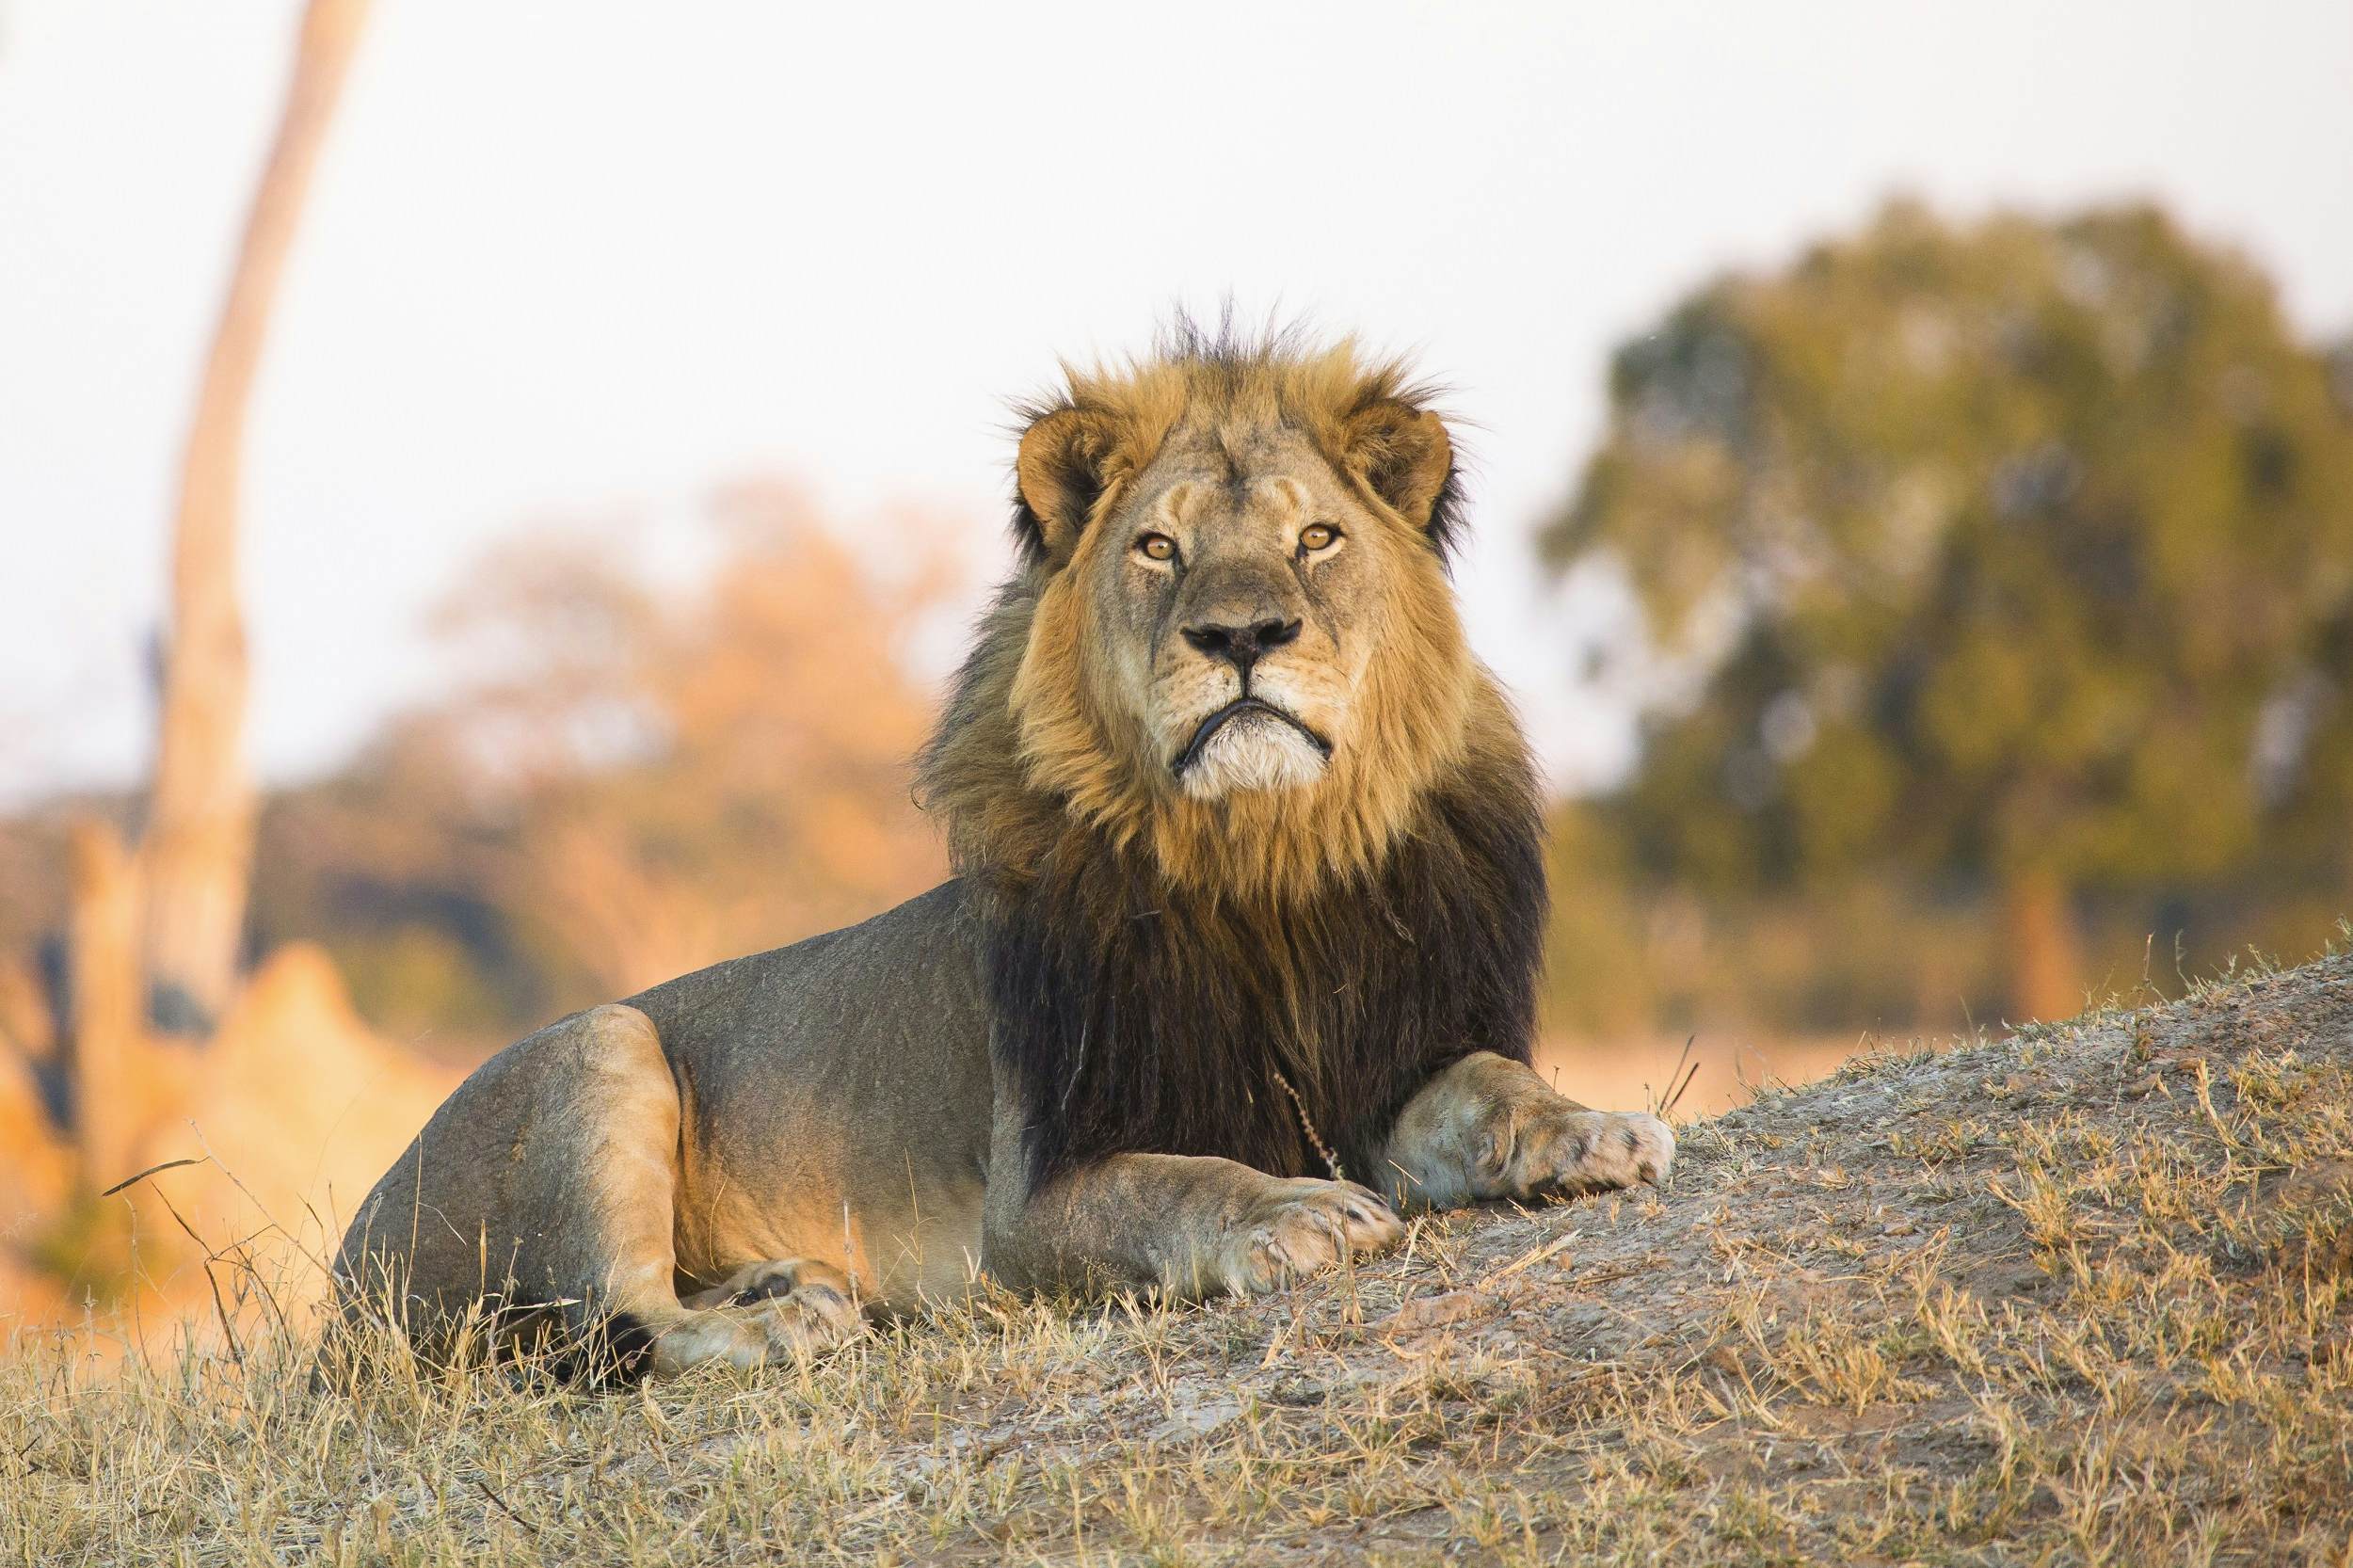 Cecil lives on in the lions of Hwange, Zimbabwe - Lonely Planet